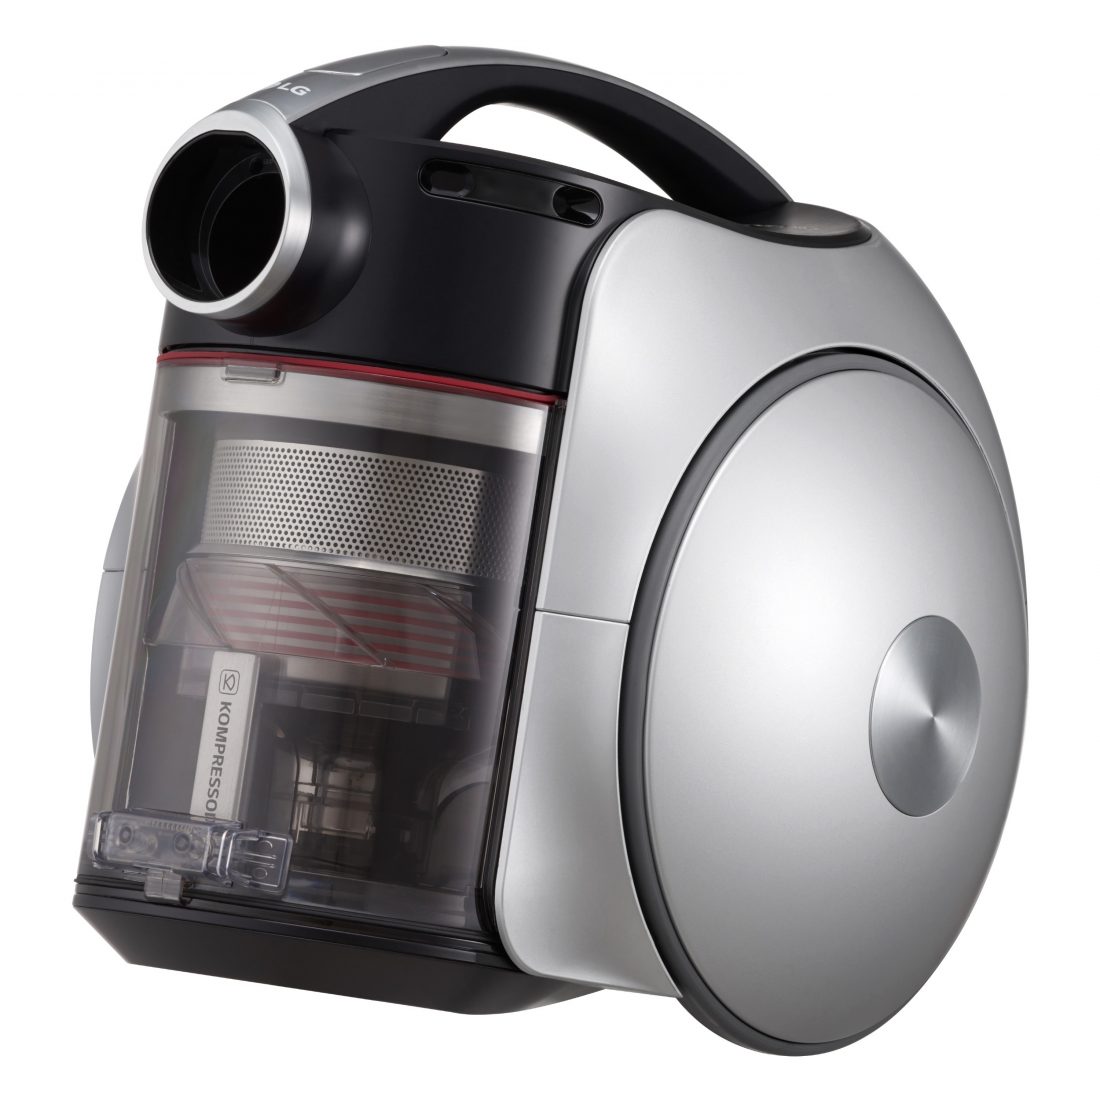 Close-up view of the LG CordZero Canister vacuum cleaner, only the canister portion